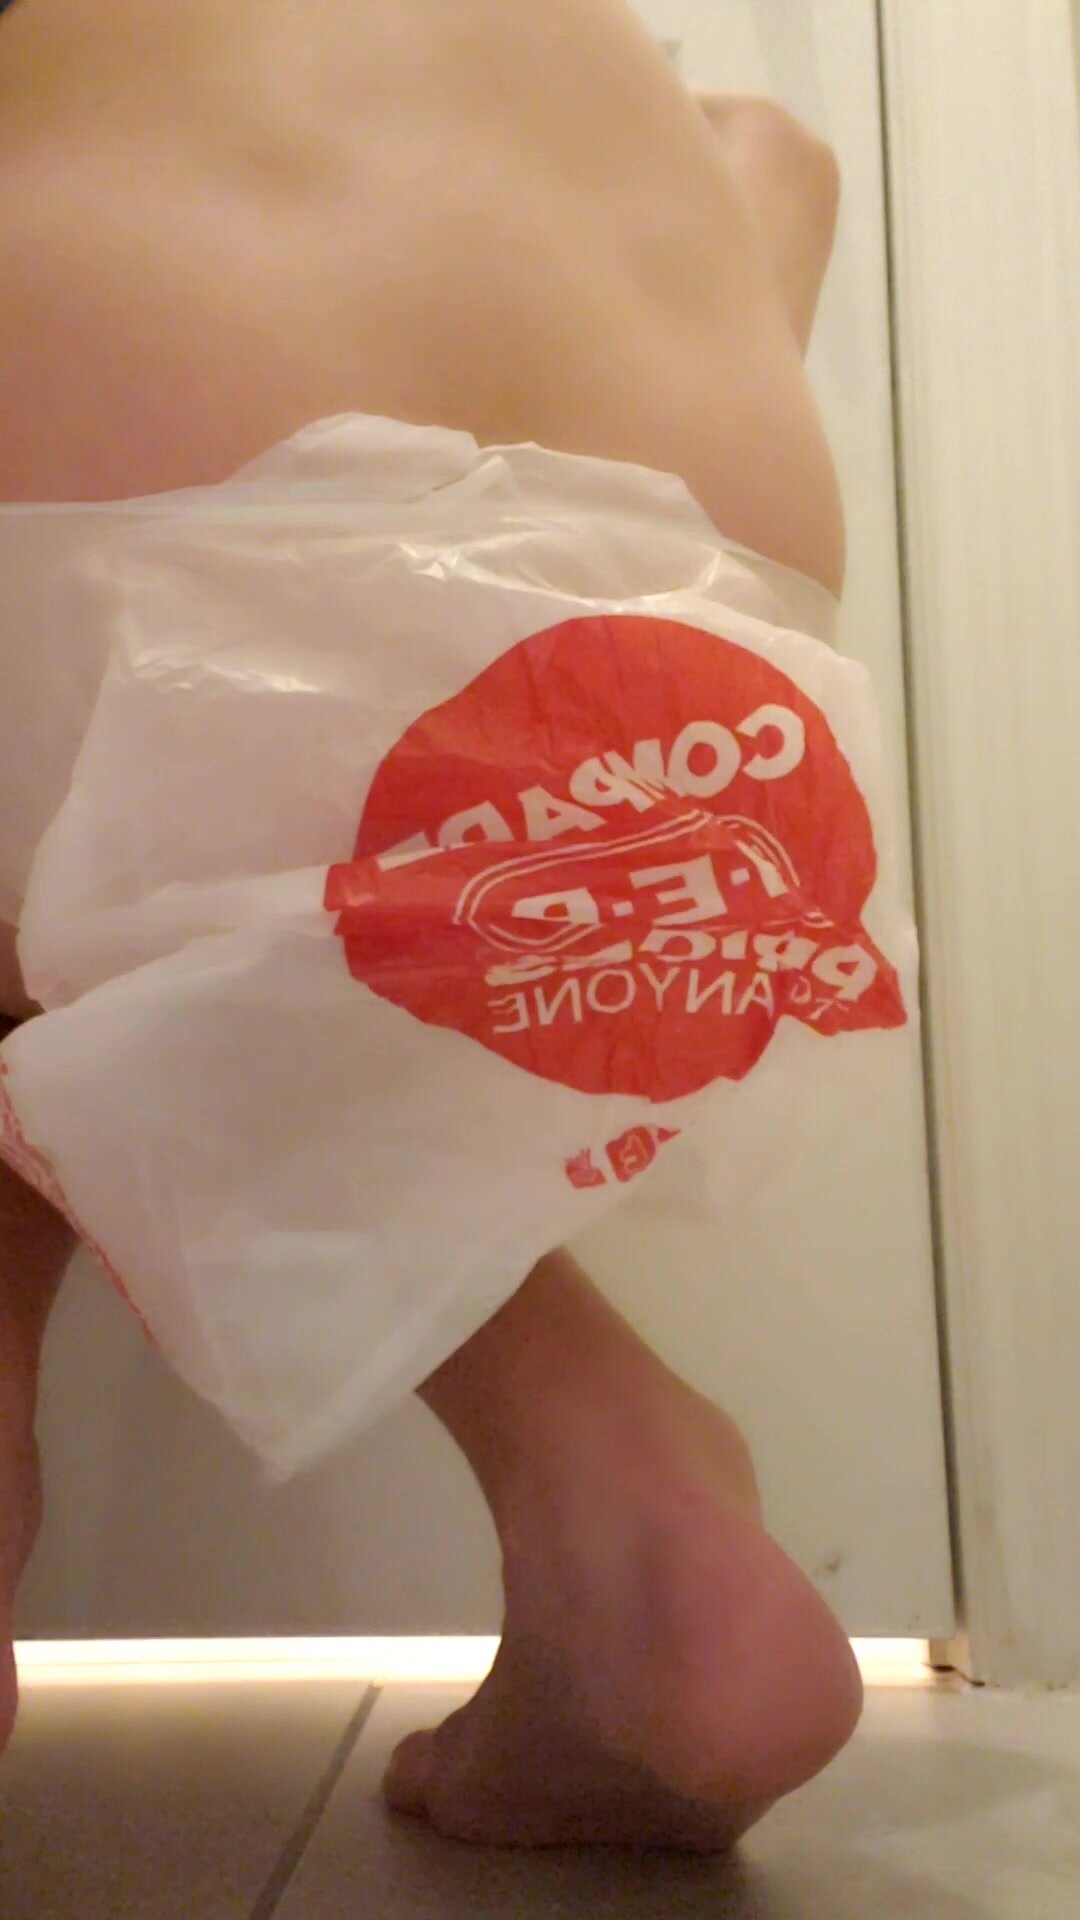 Using a plastic bag as a diaper! (LEAKED!)